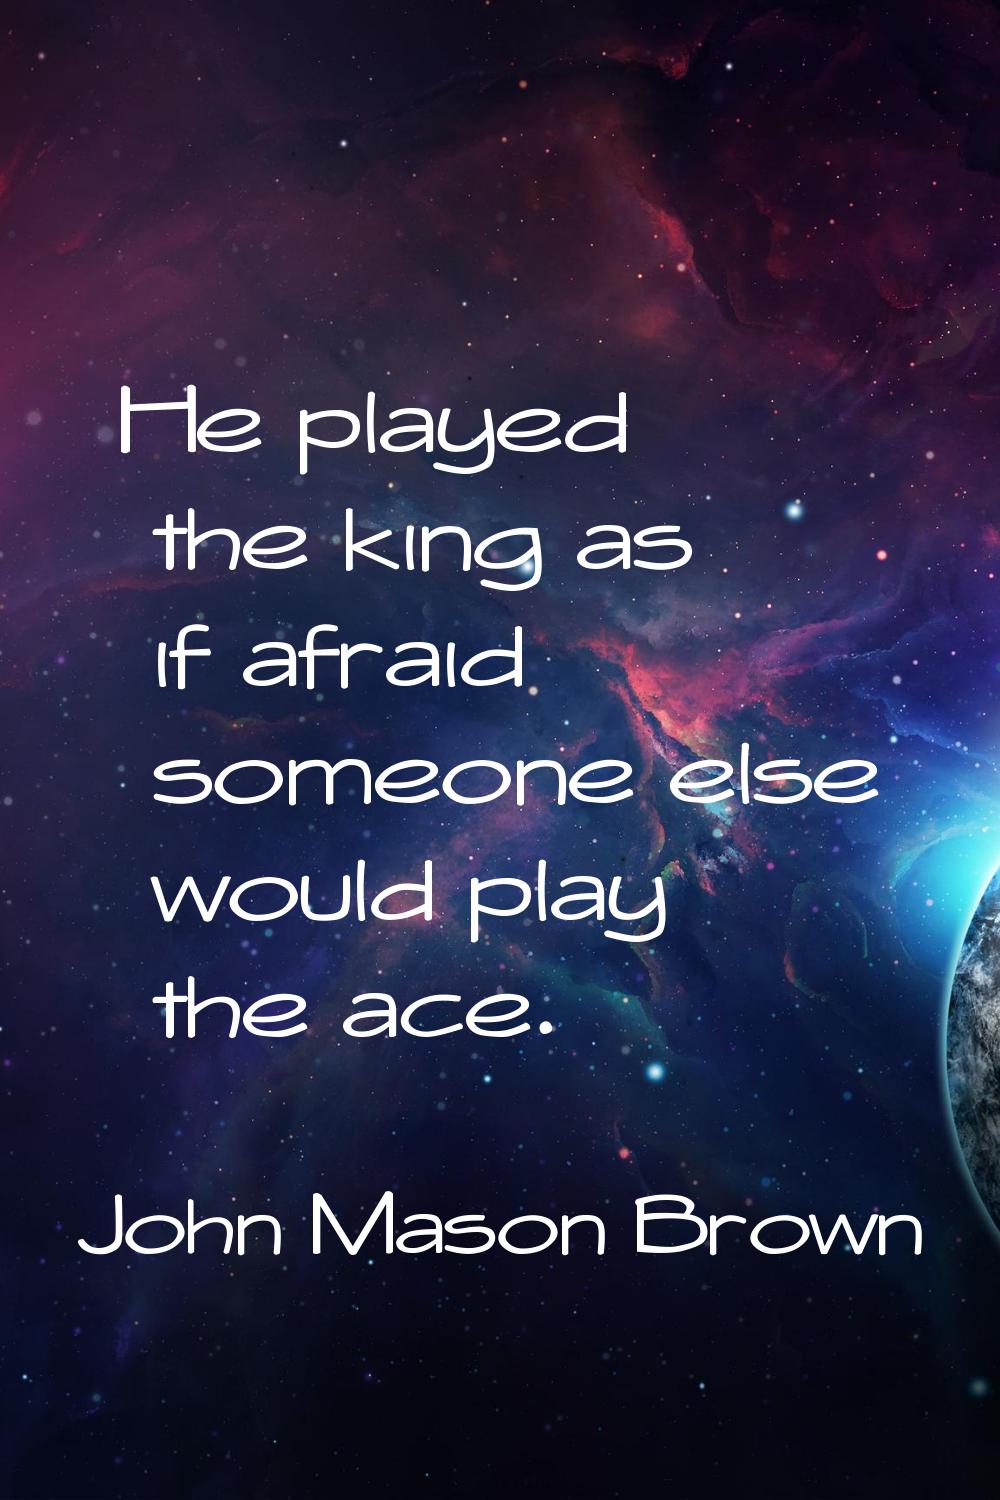 He played the king as if afraid someone else would play the ace.